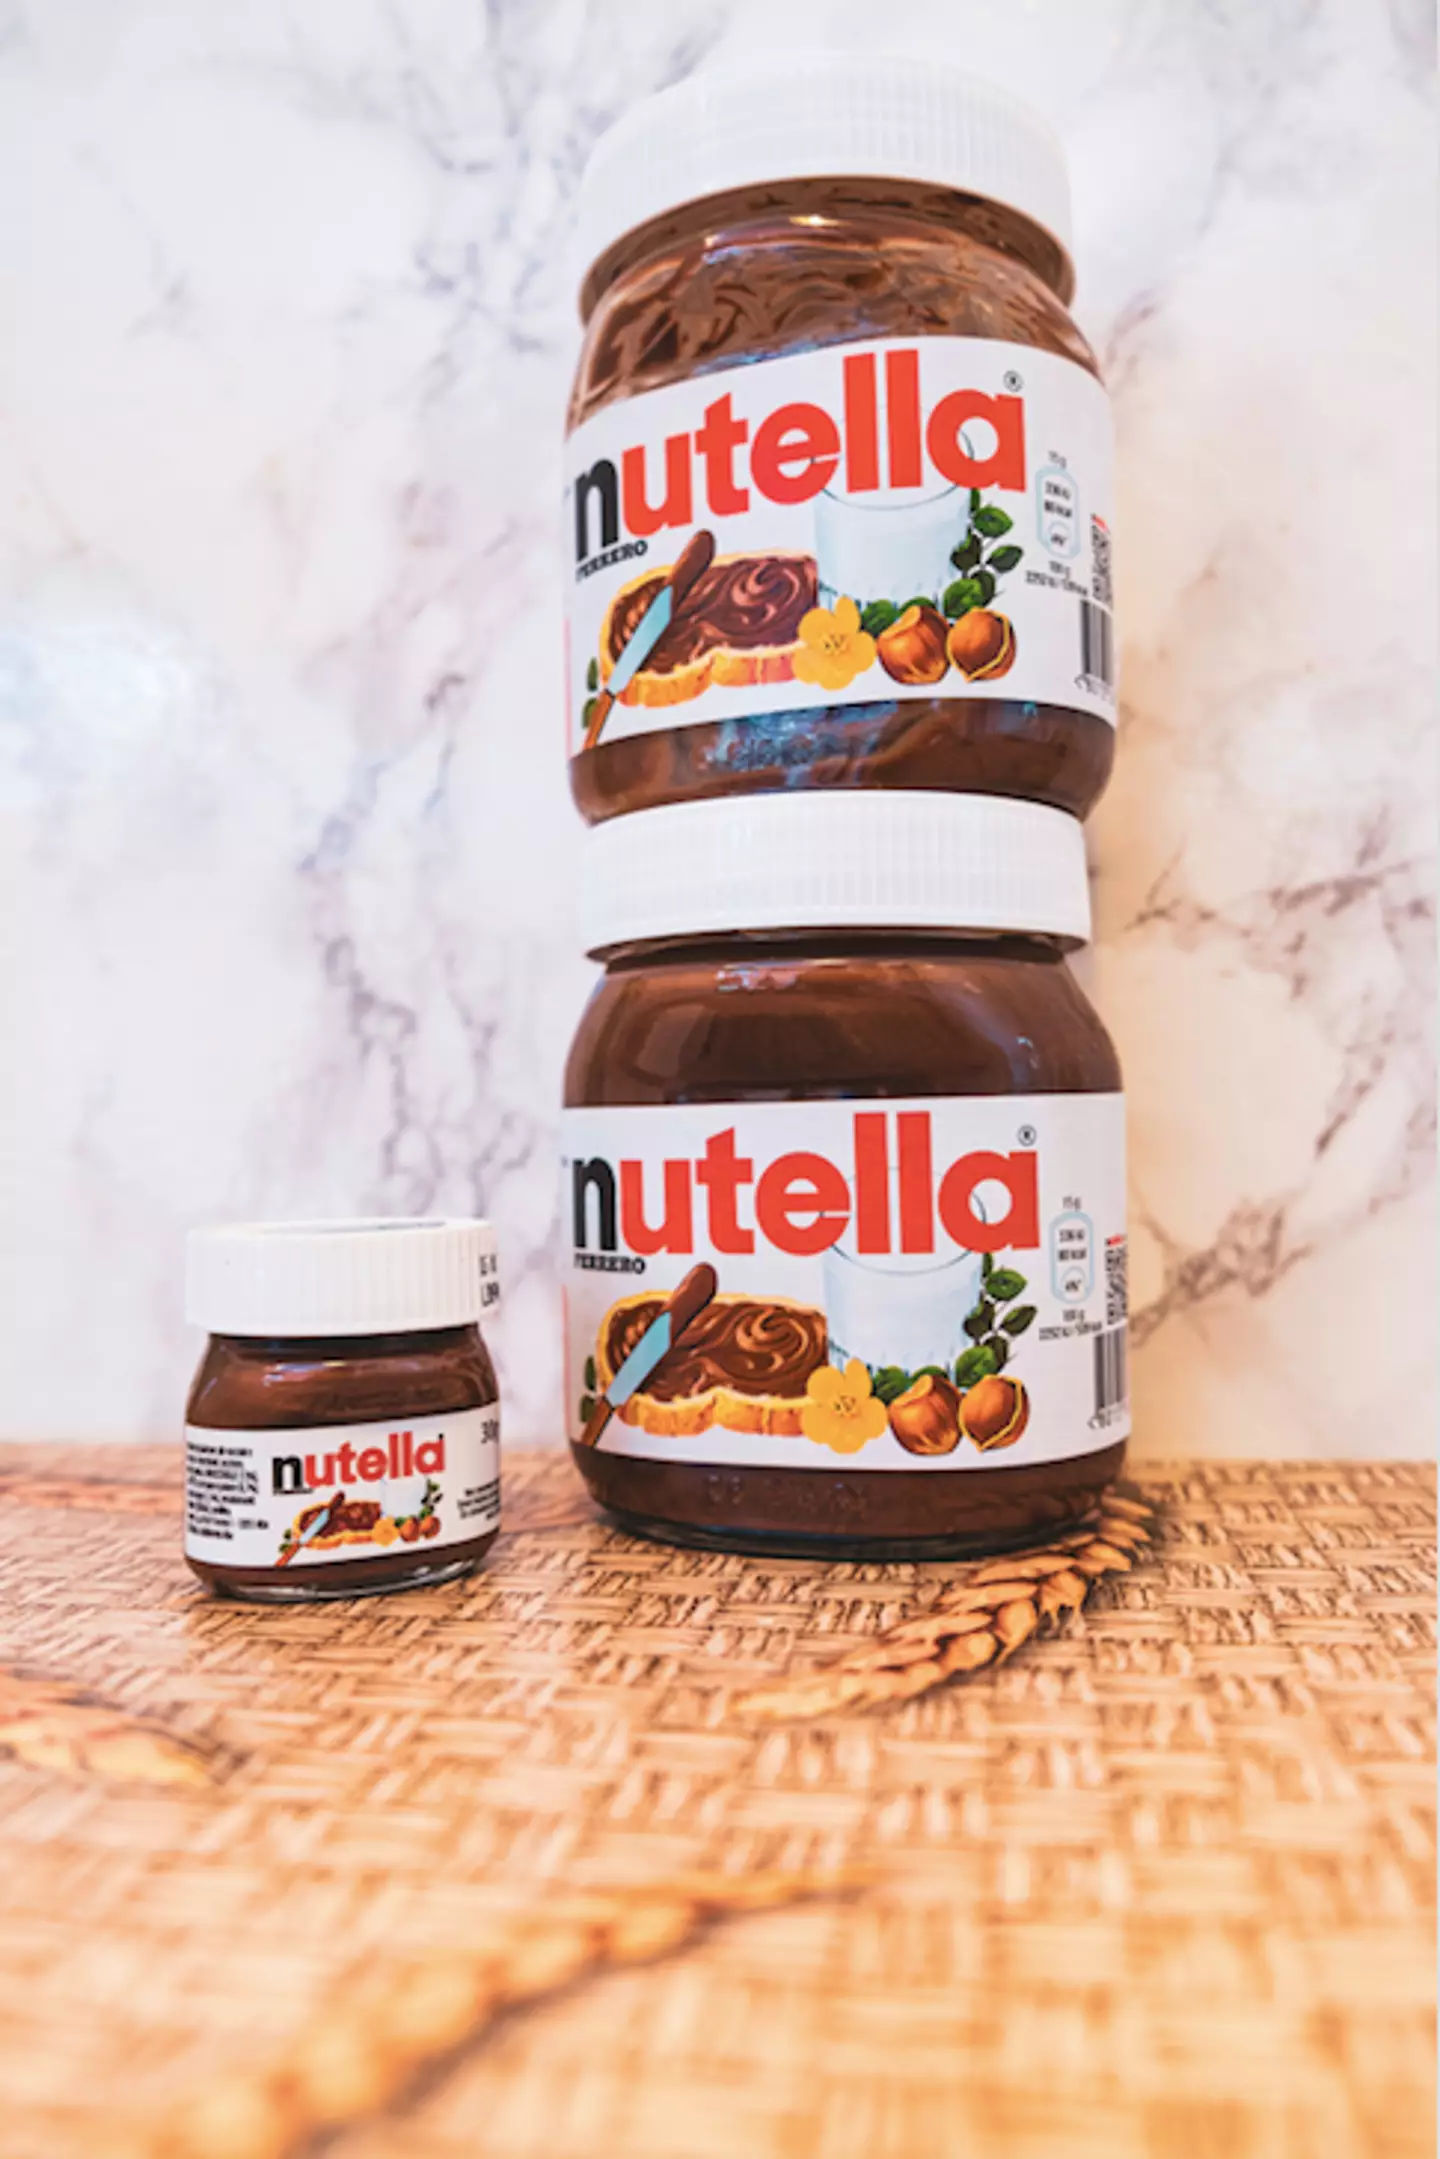 We're stocking up on our Nutella at this news (